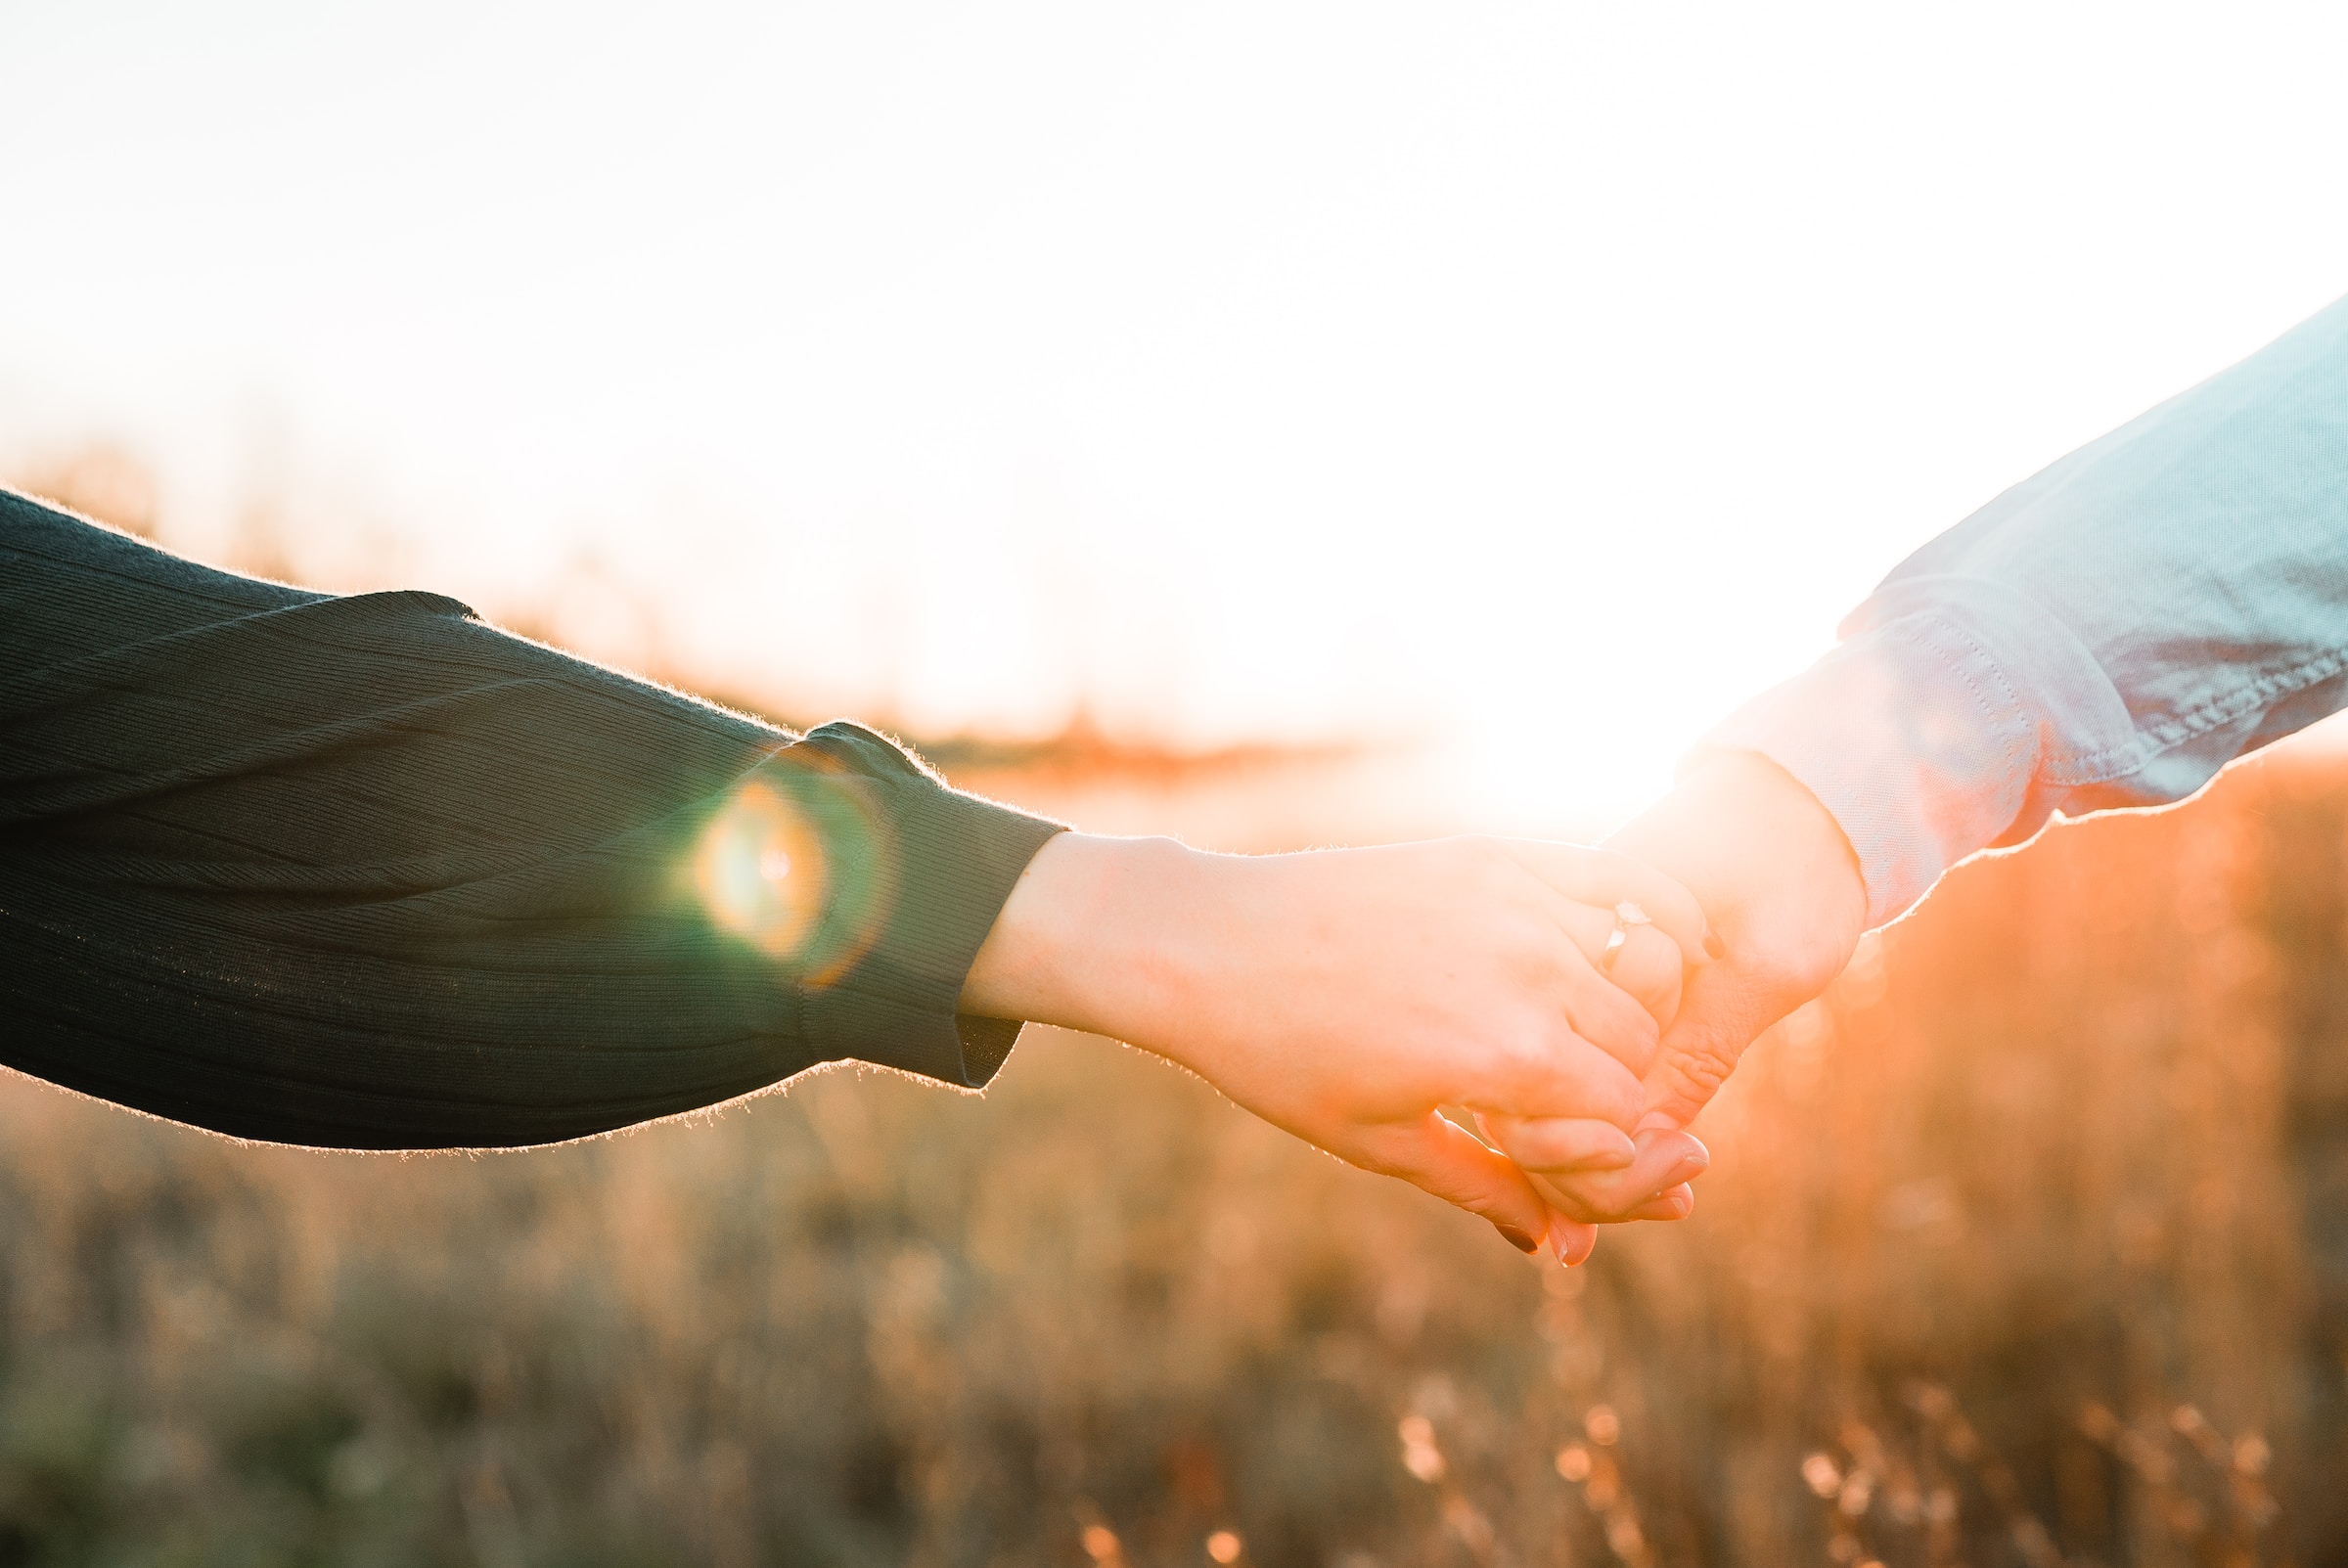 A couple pictured holding hands in the sun | Source: Unsplash